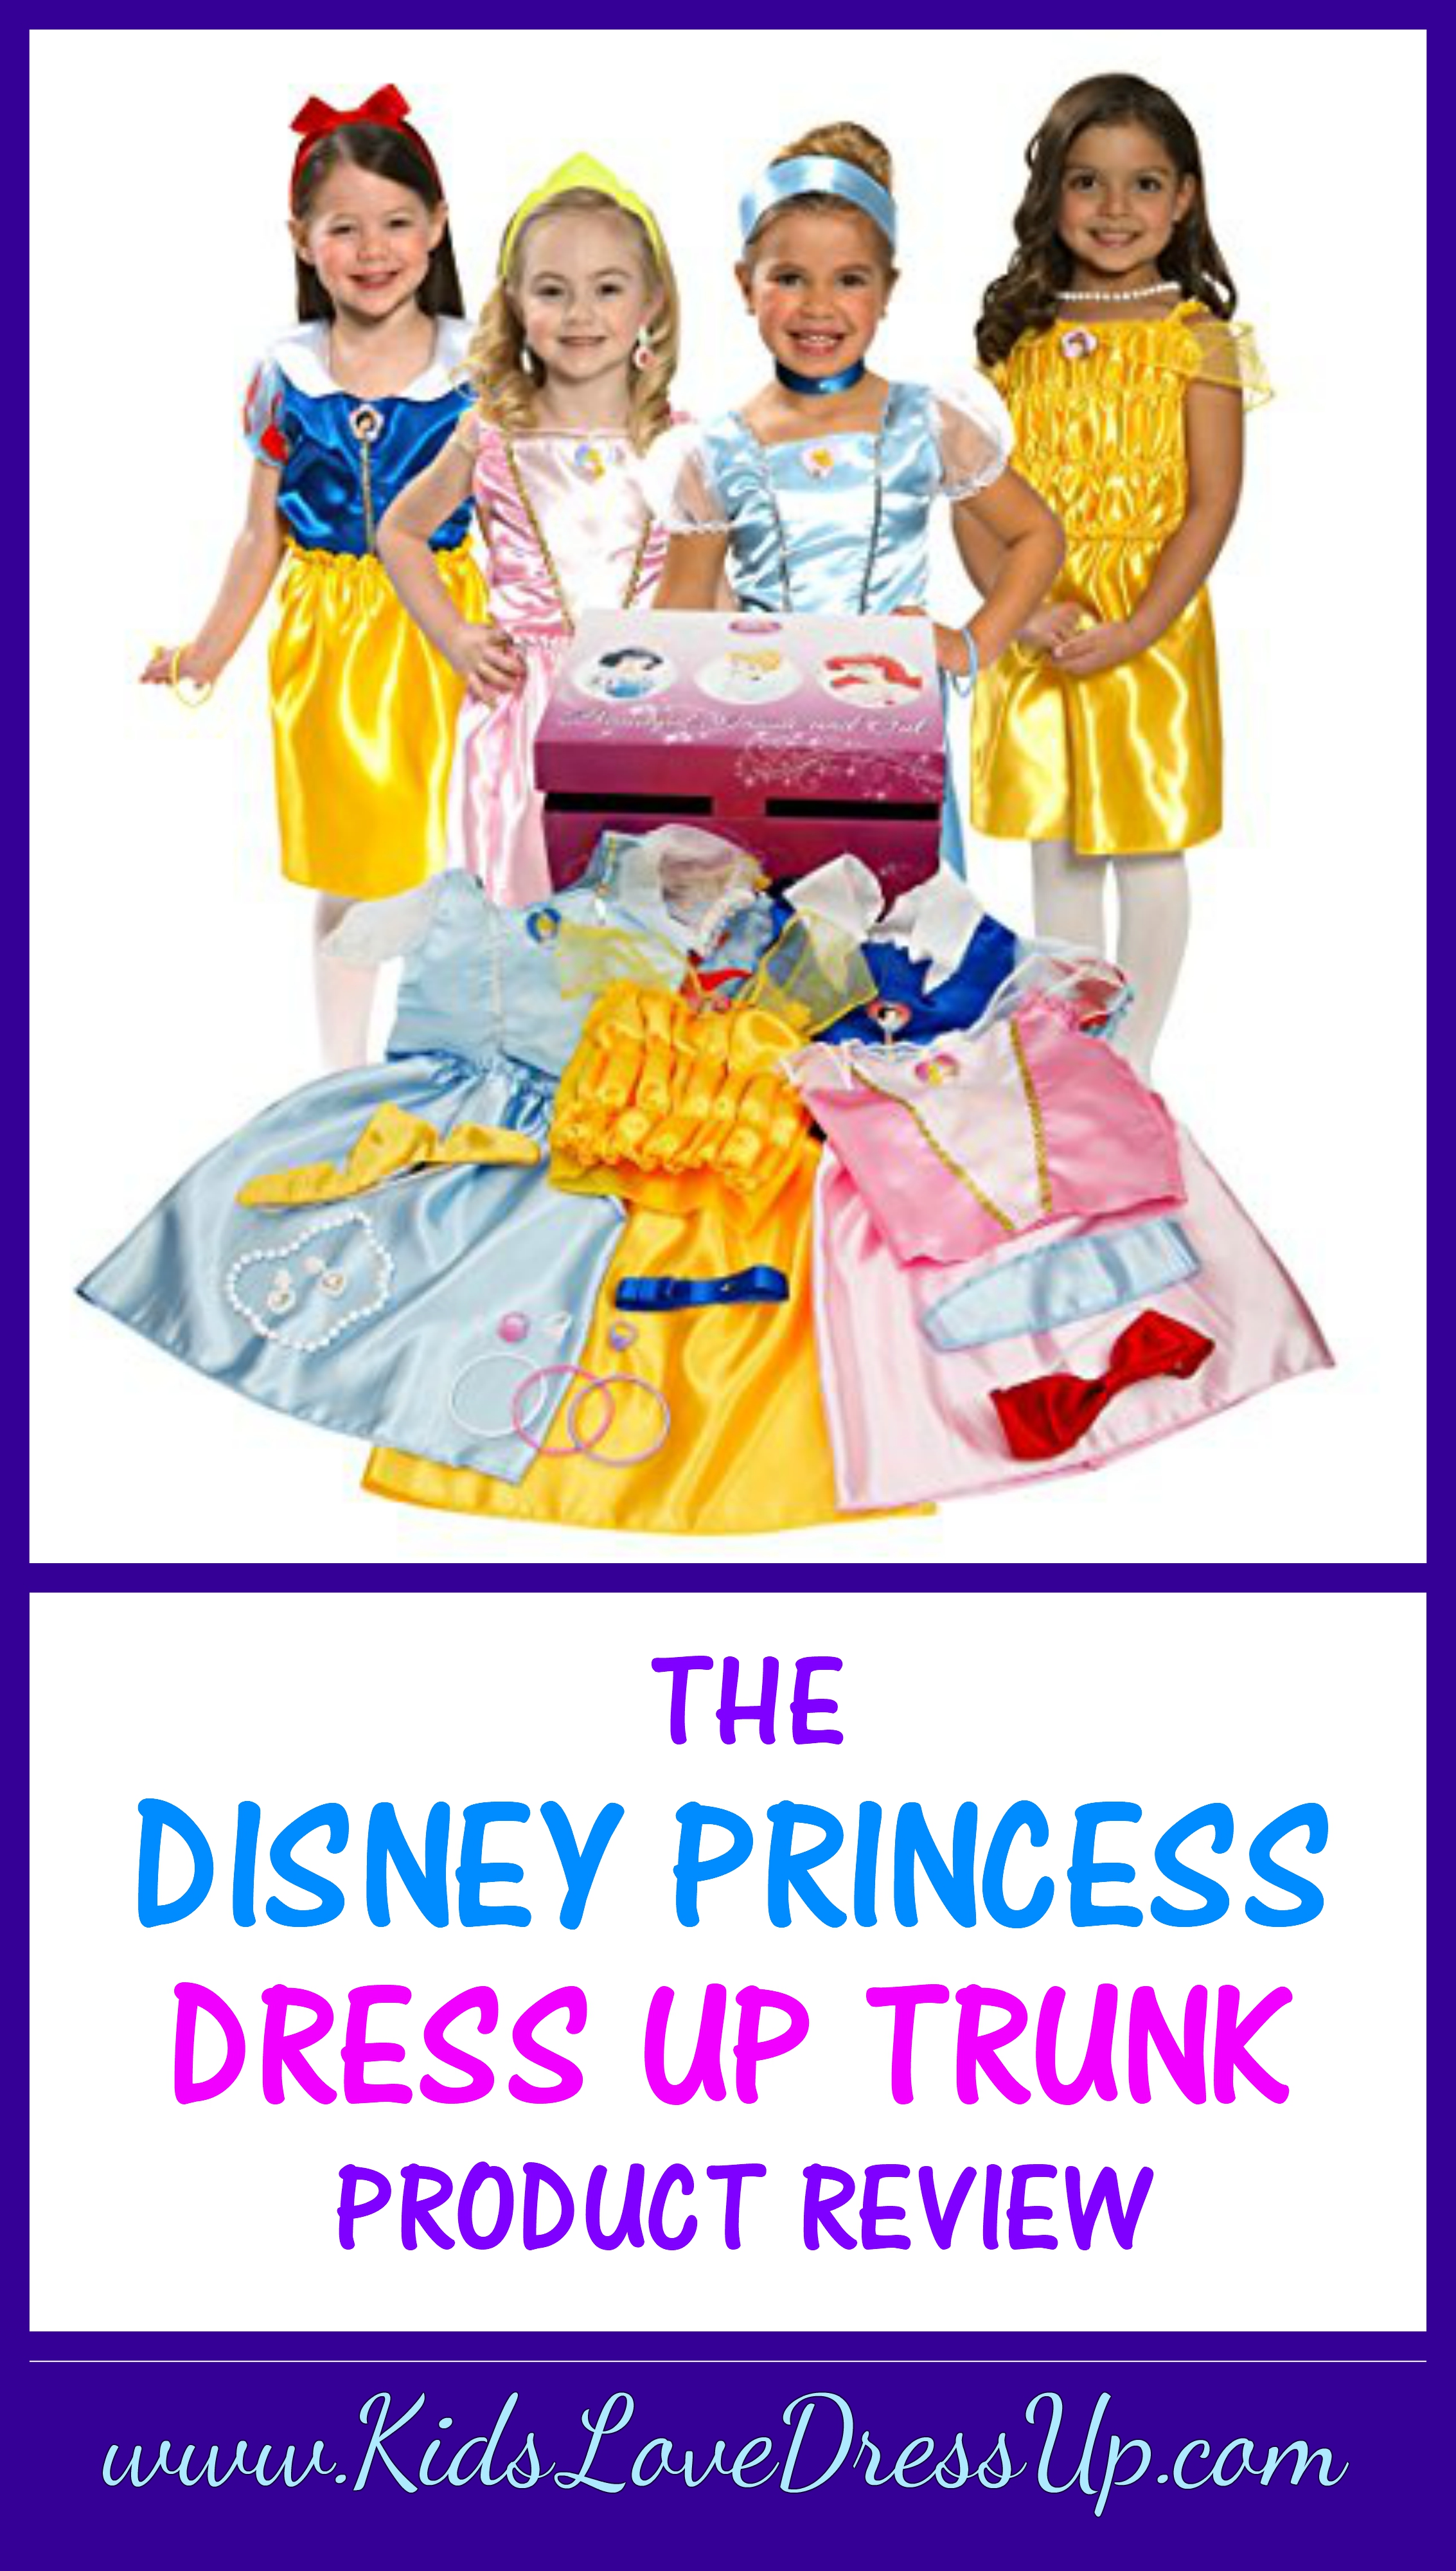 Product Review of the Disney Princess Dress Up Trunk - dress up set for girls, disney princess dress up - gifts for girls, dress up clothes, princess gowns